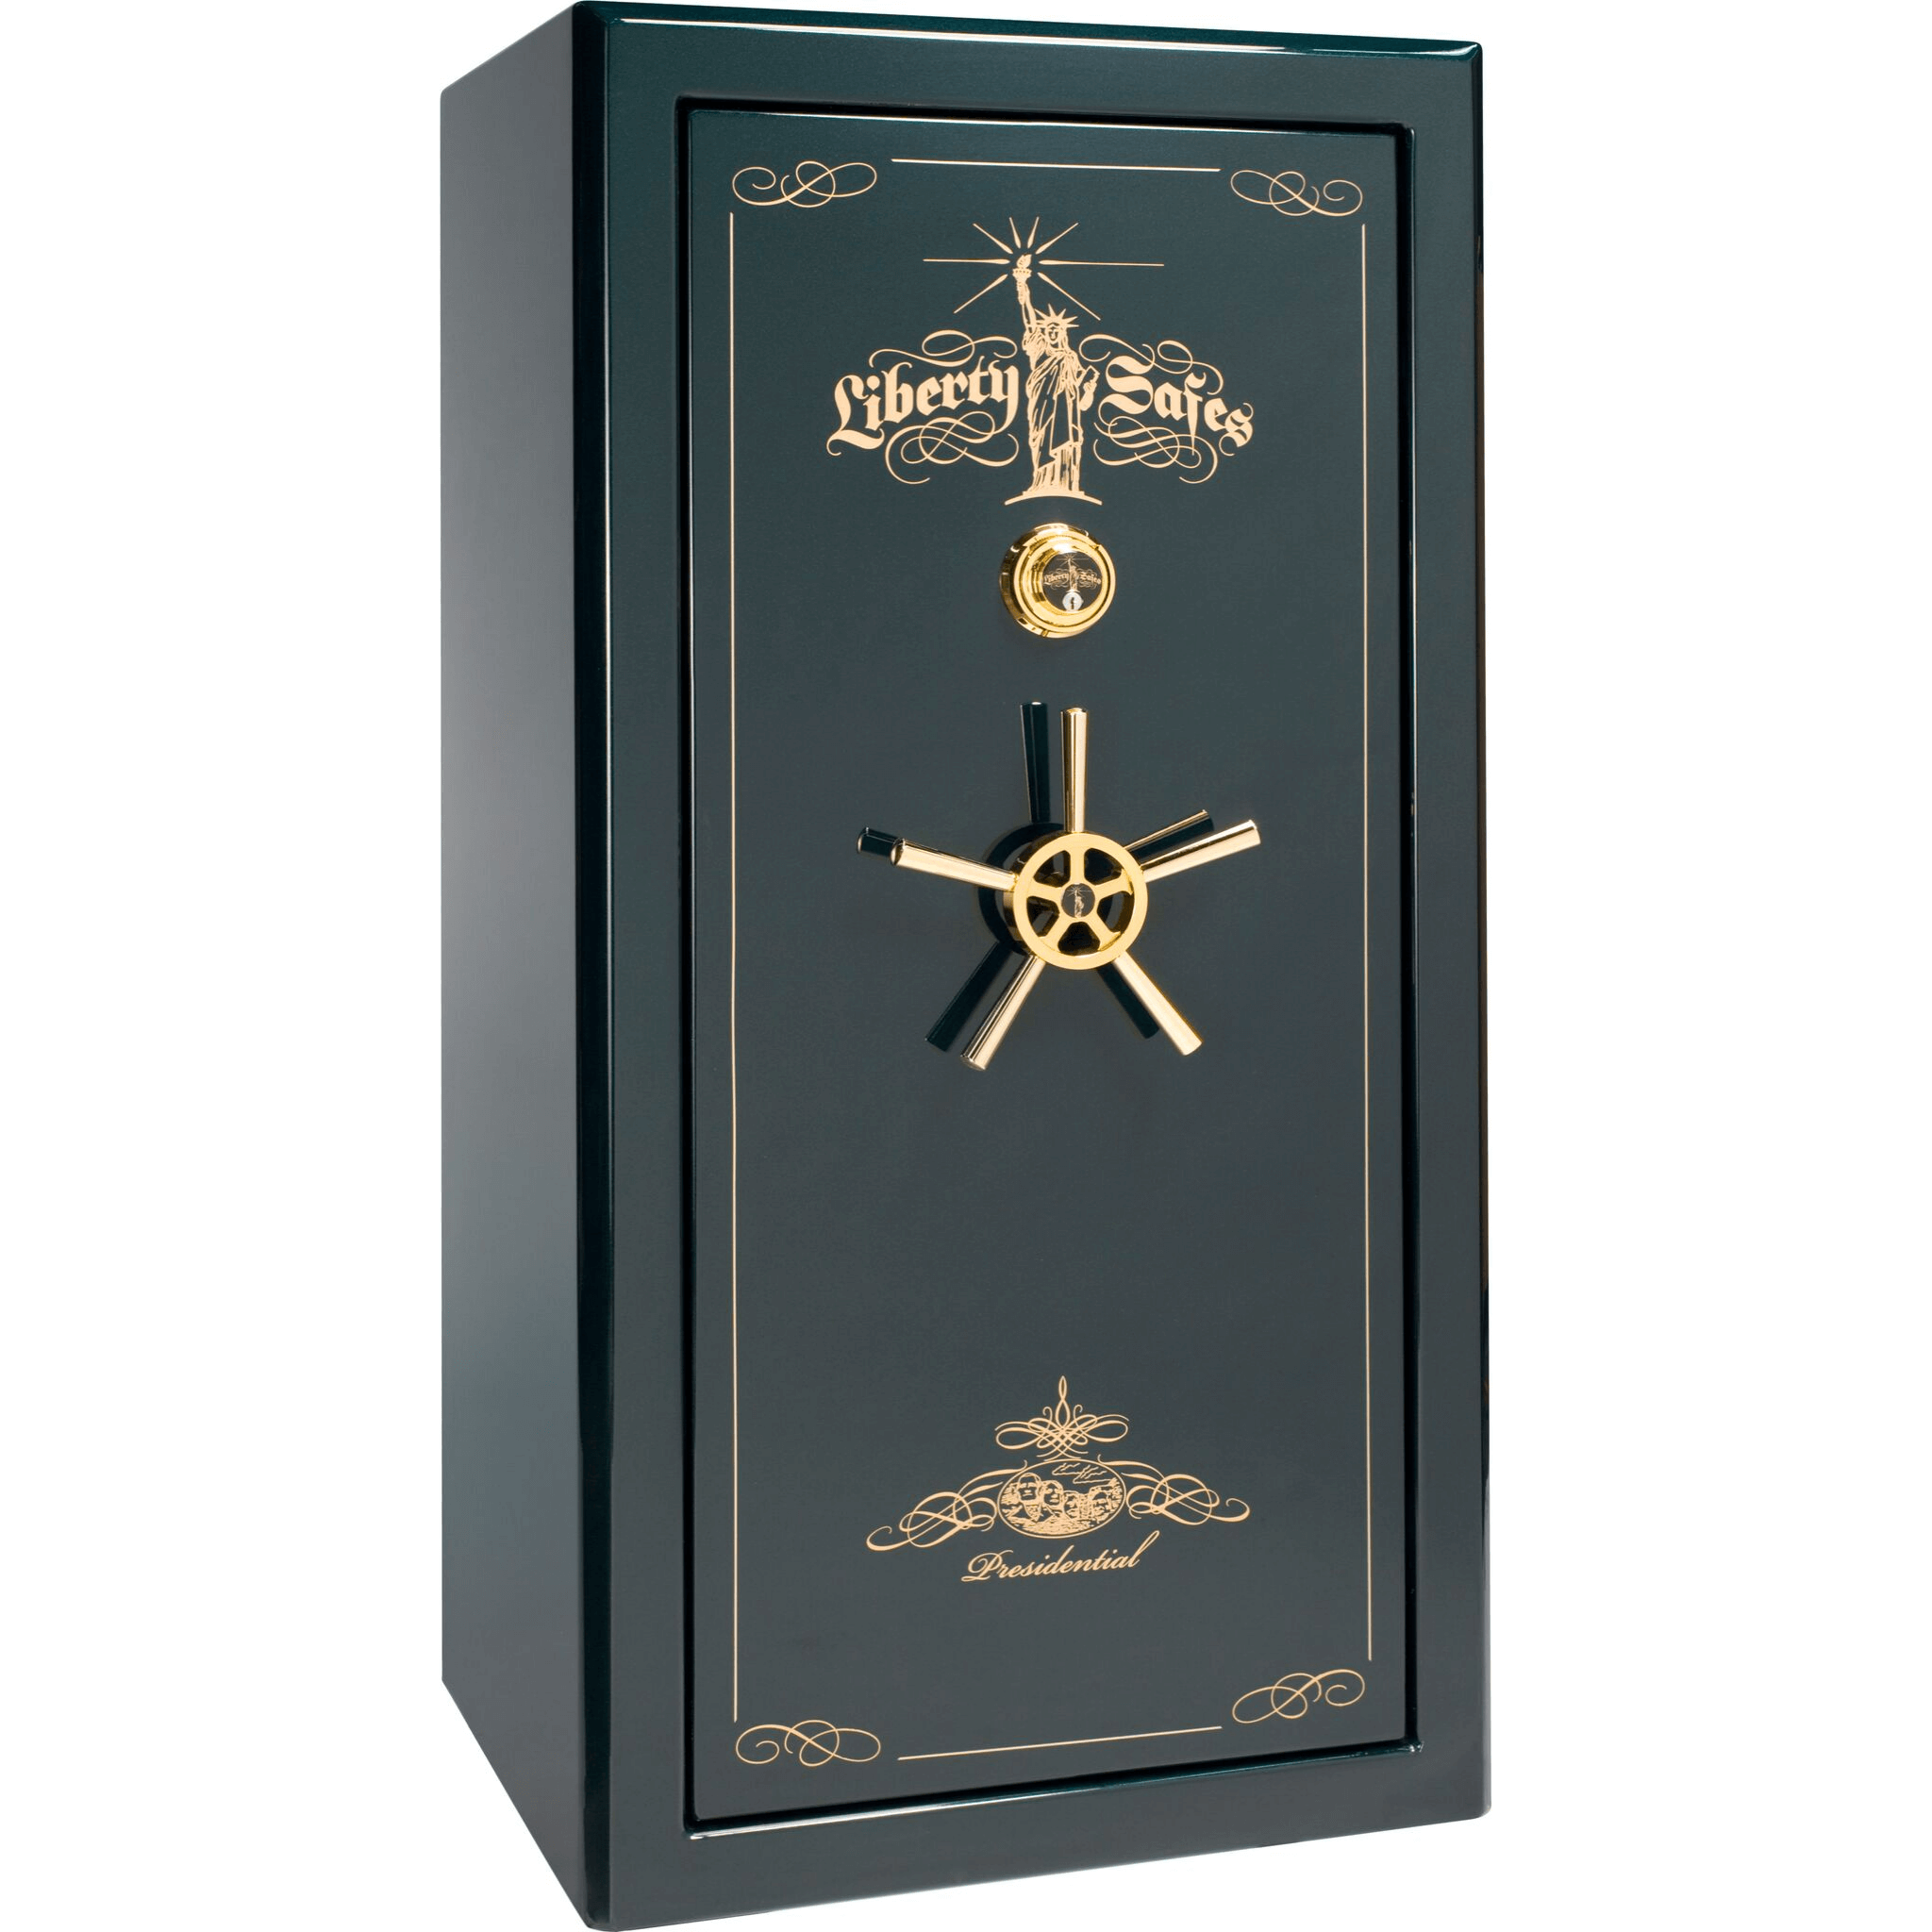 Presidential Series | Level 8 Security | 2.5 Hours Fire Protection | 25 | Dimensions: 60.5"(H) x 30.25"(W) x 28.5"(D) | Green Gloss Gold Hardware | Mechanical Lock